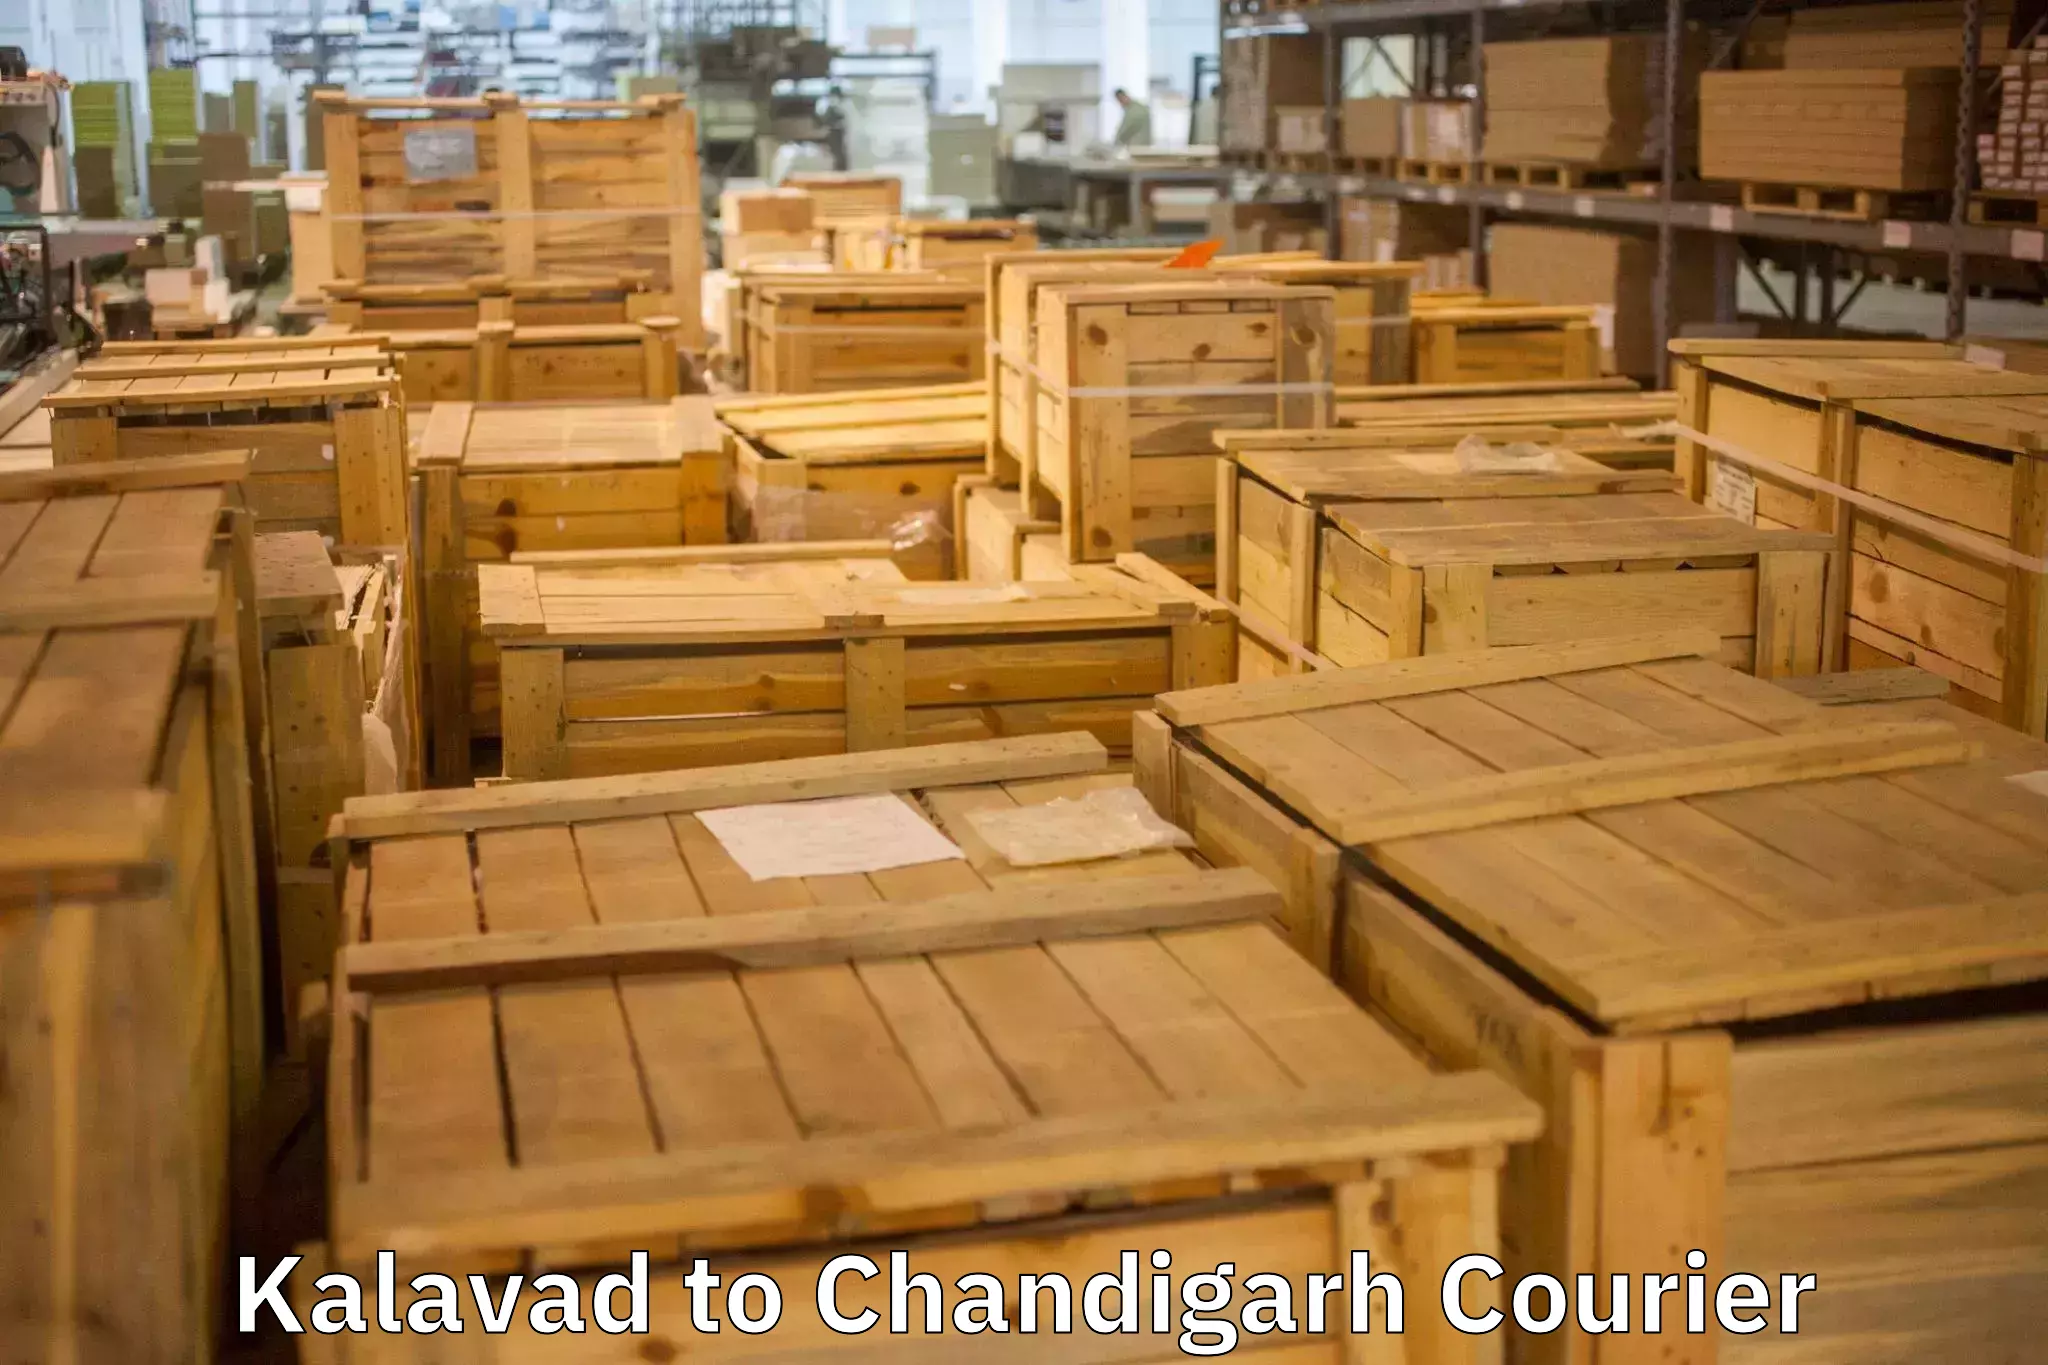 Furniture moving specialists Kalavad to Chandigarh